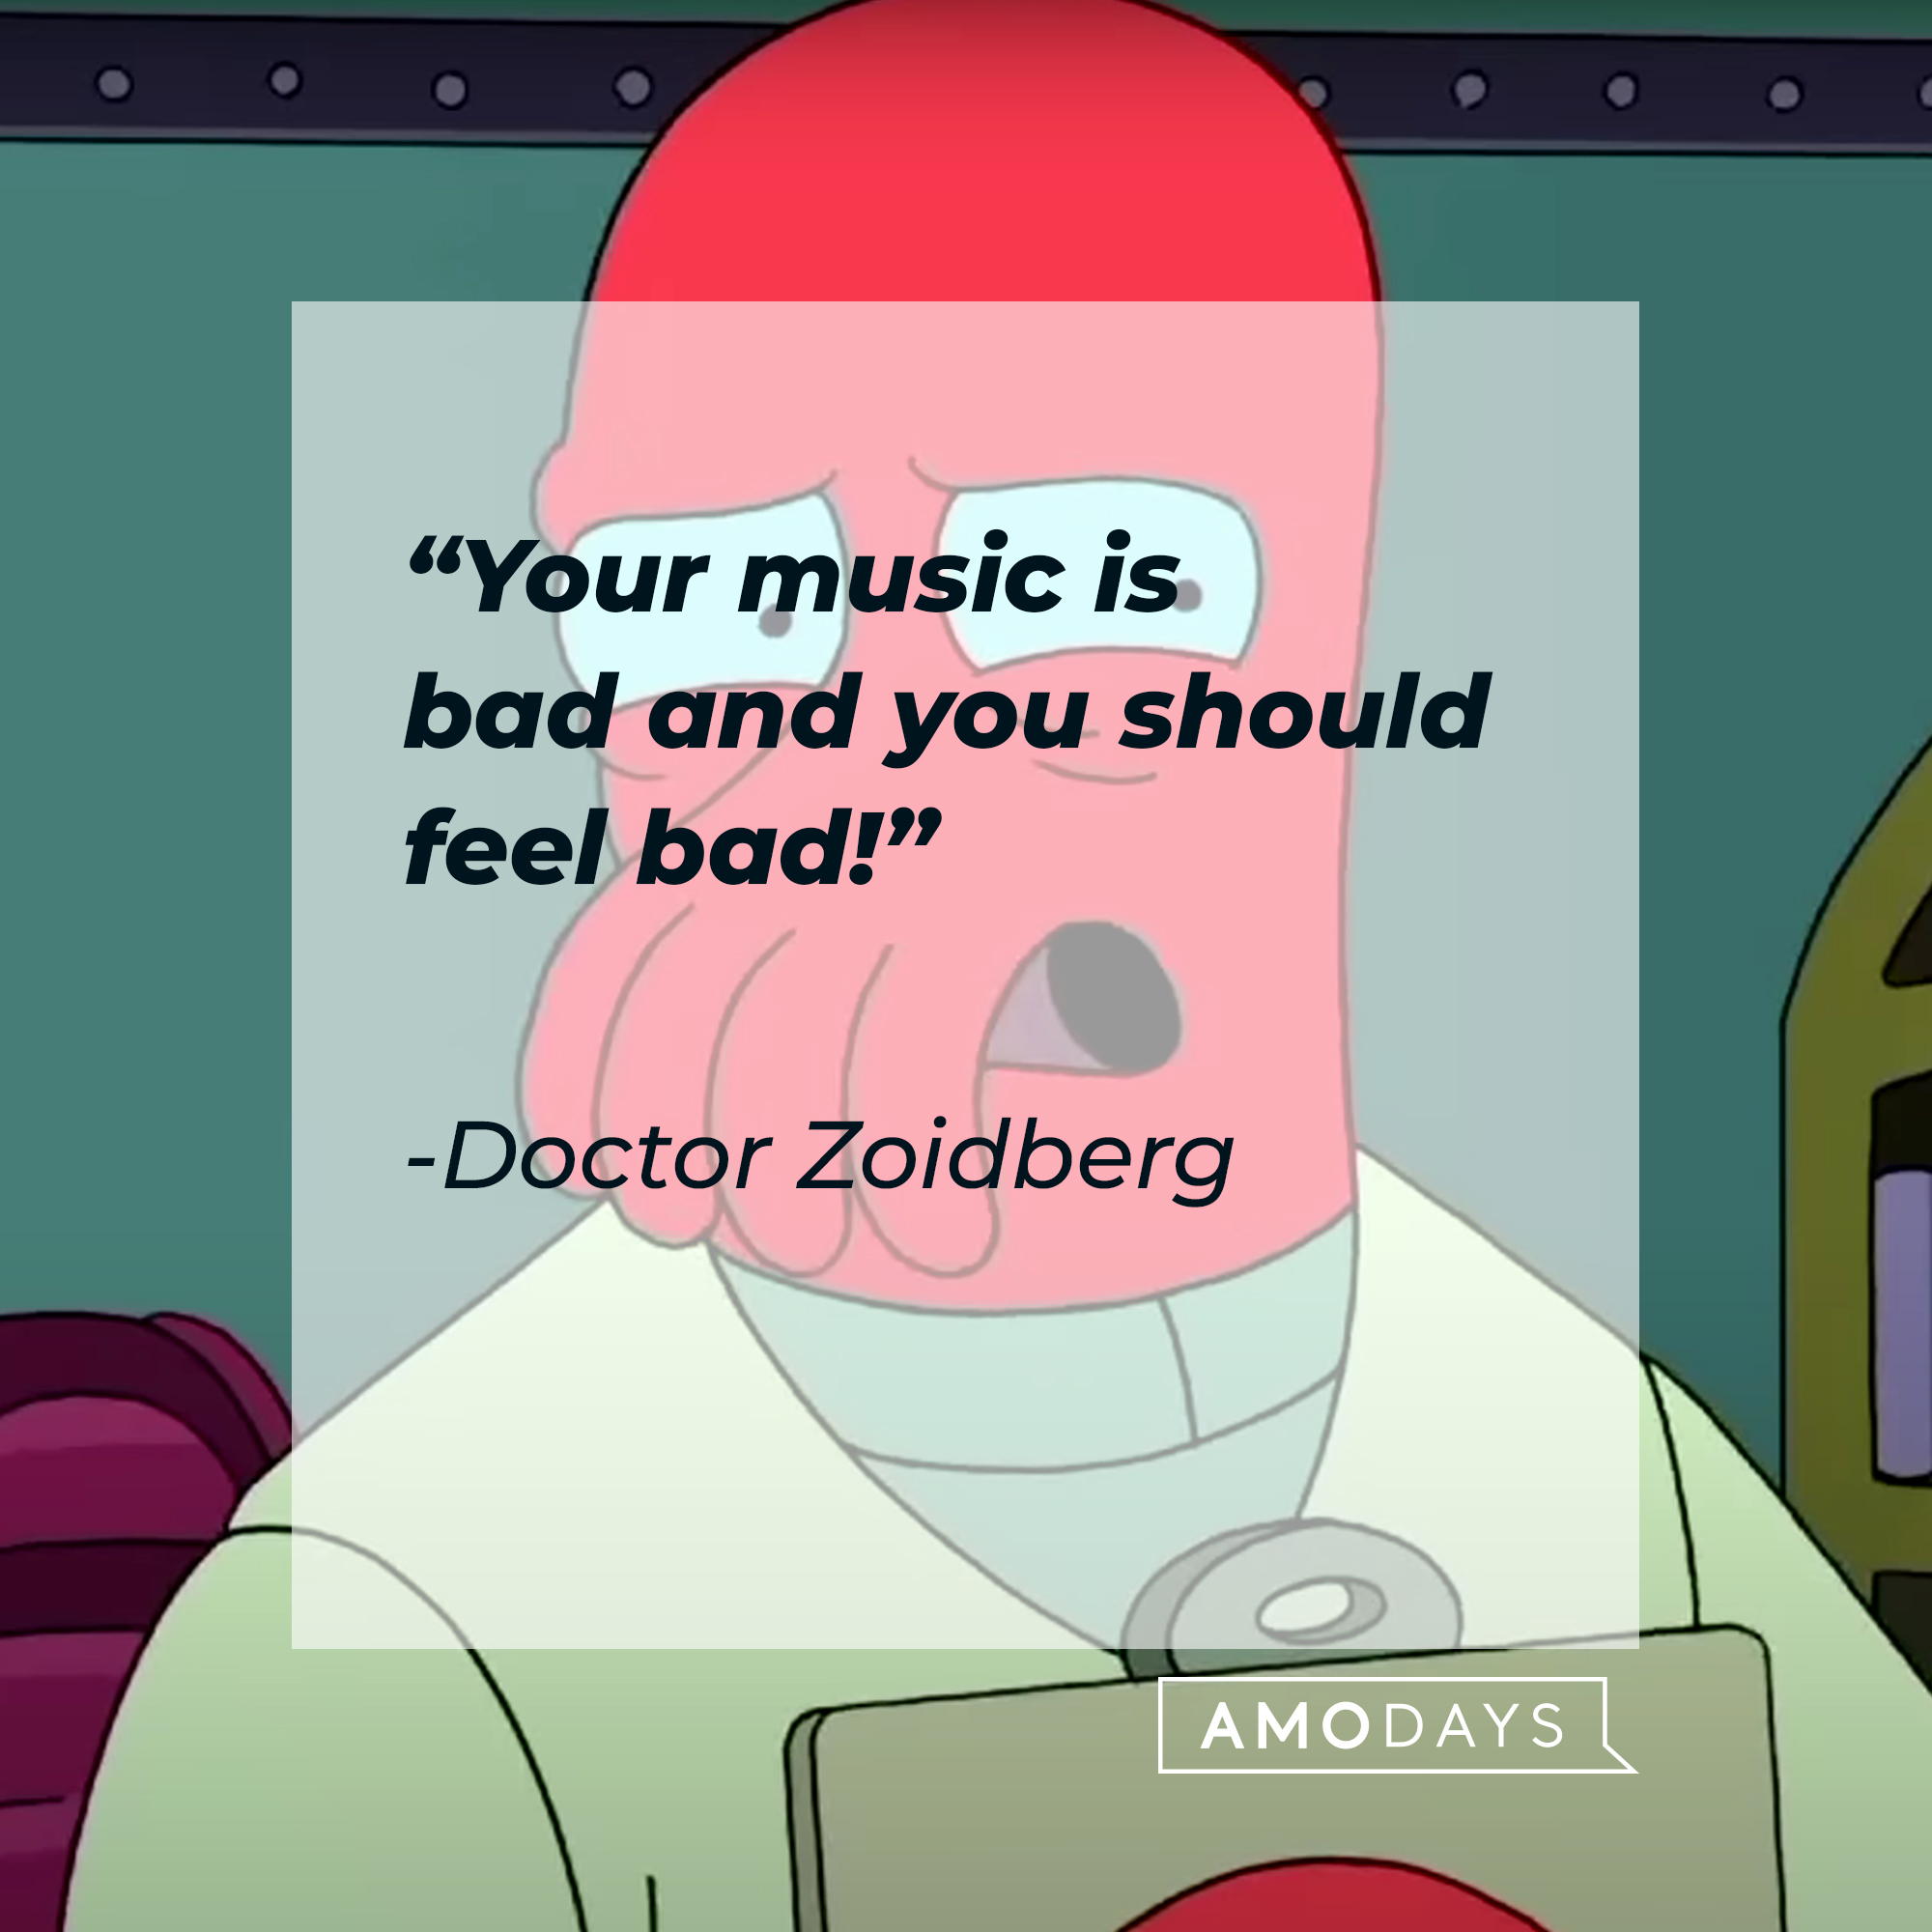 Doctor Zoidberg, with his quote: “Your music is bad, and you should feel bad!” | Source:  facebook.com/Futurama